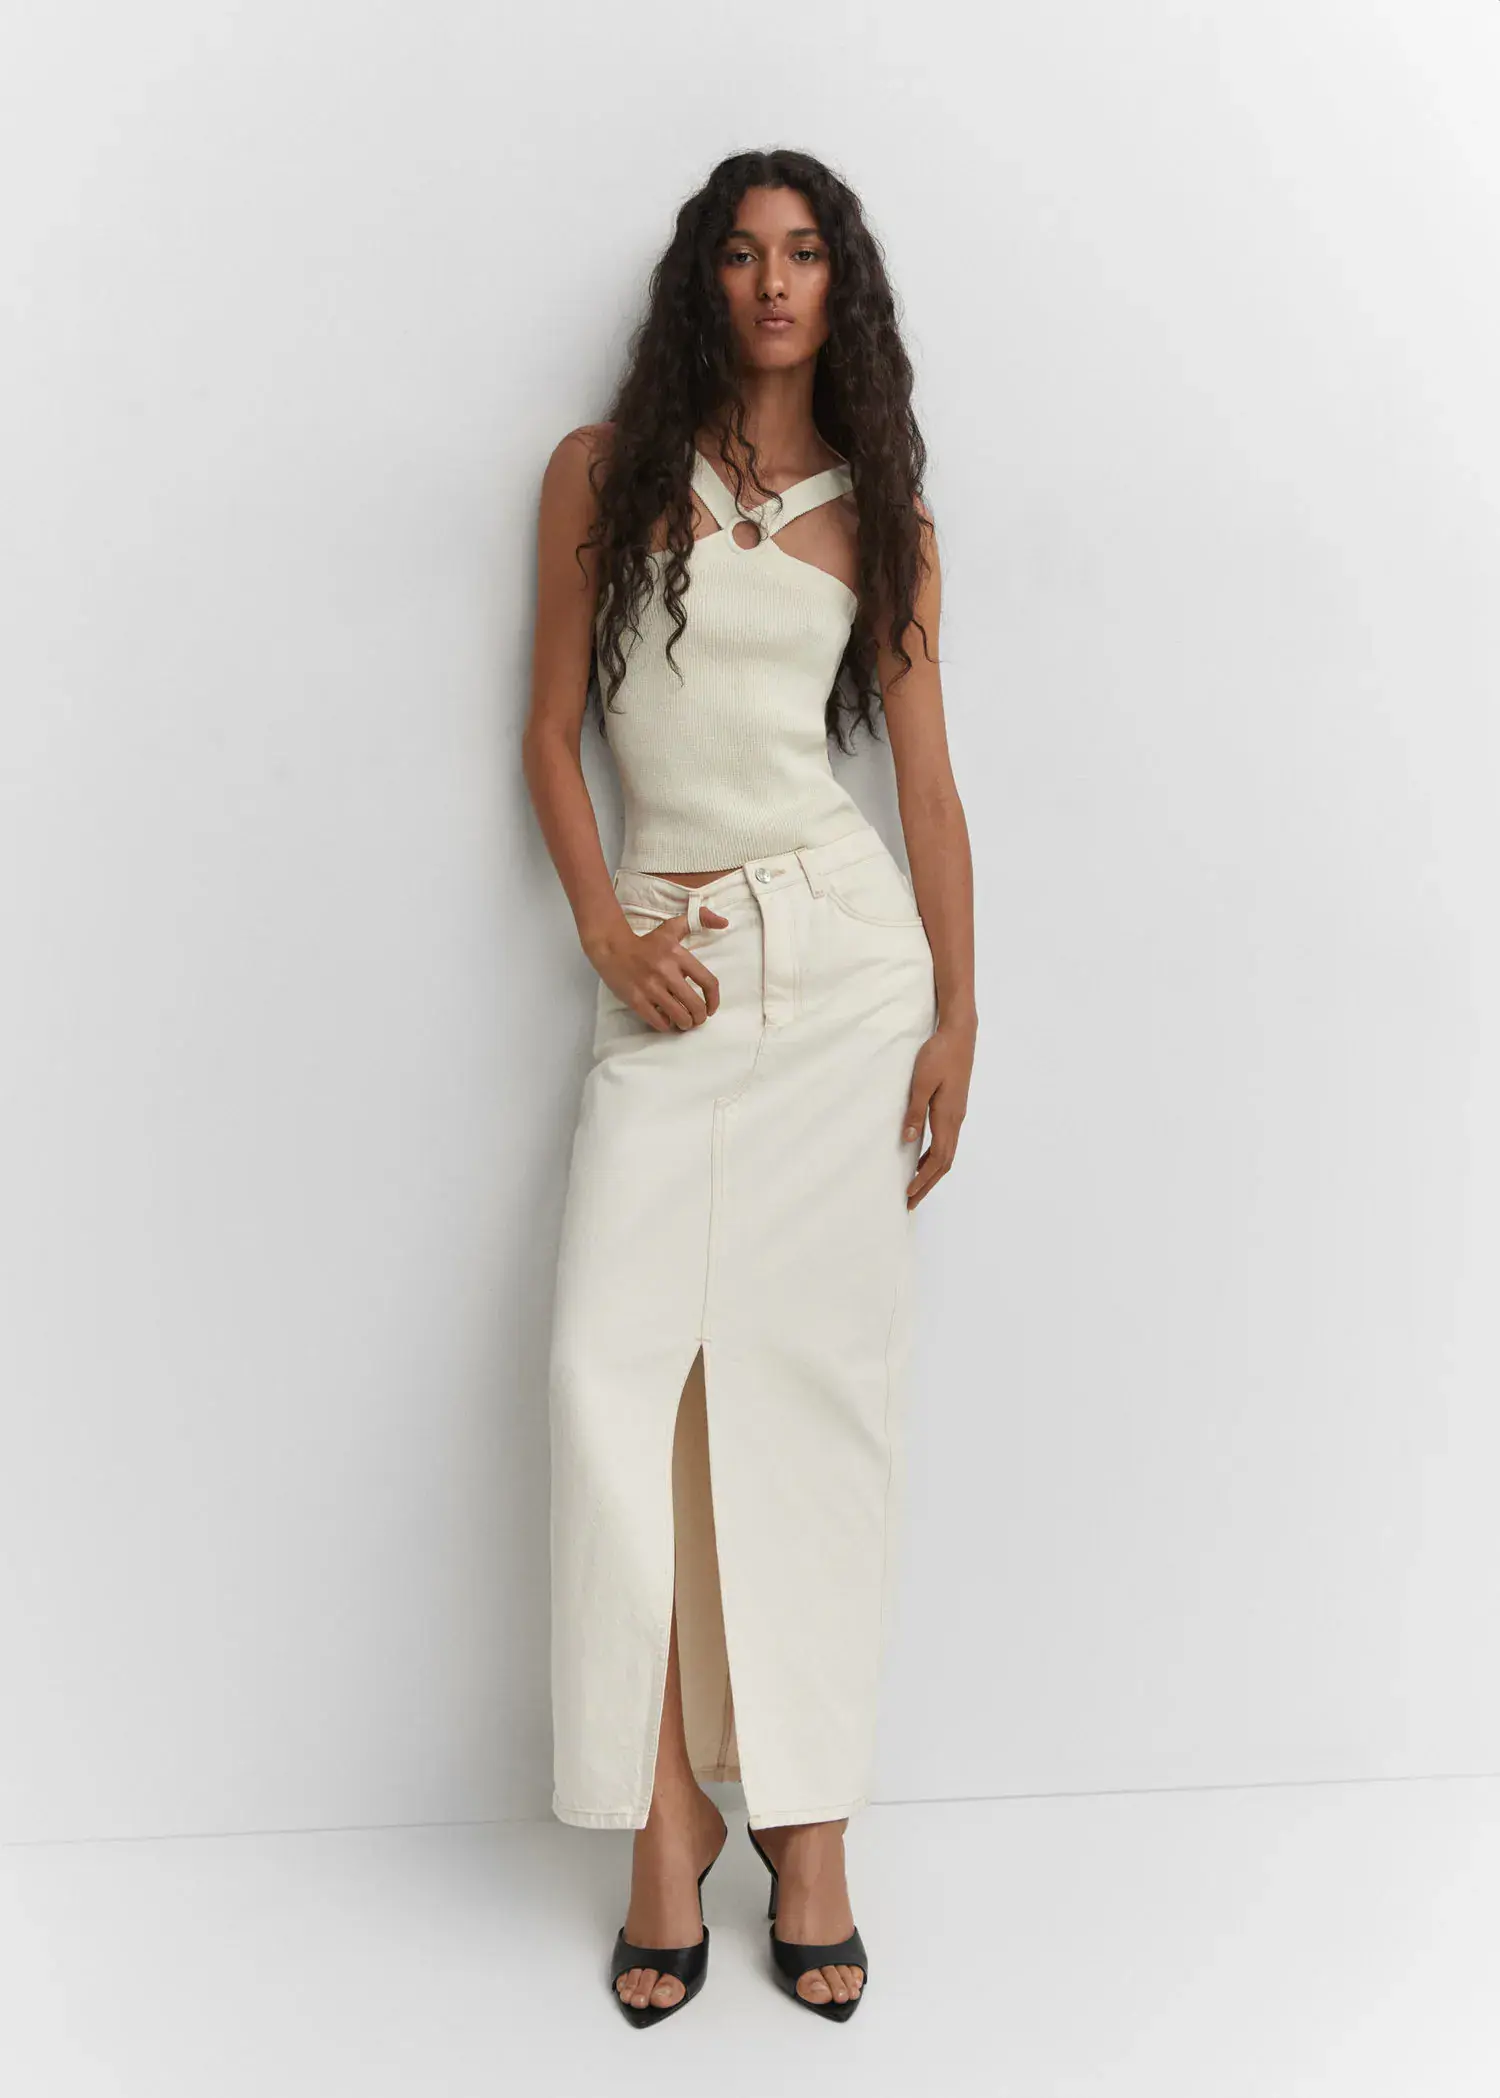 Mango Heel non-structured sandals. a woman leaning up against a wall wearing a white dress. 